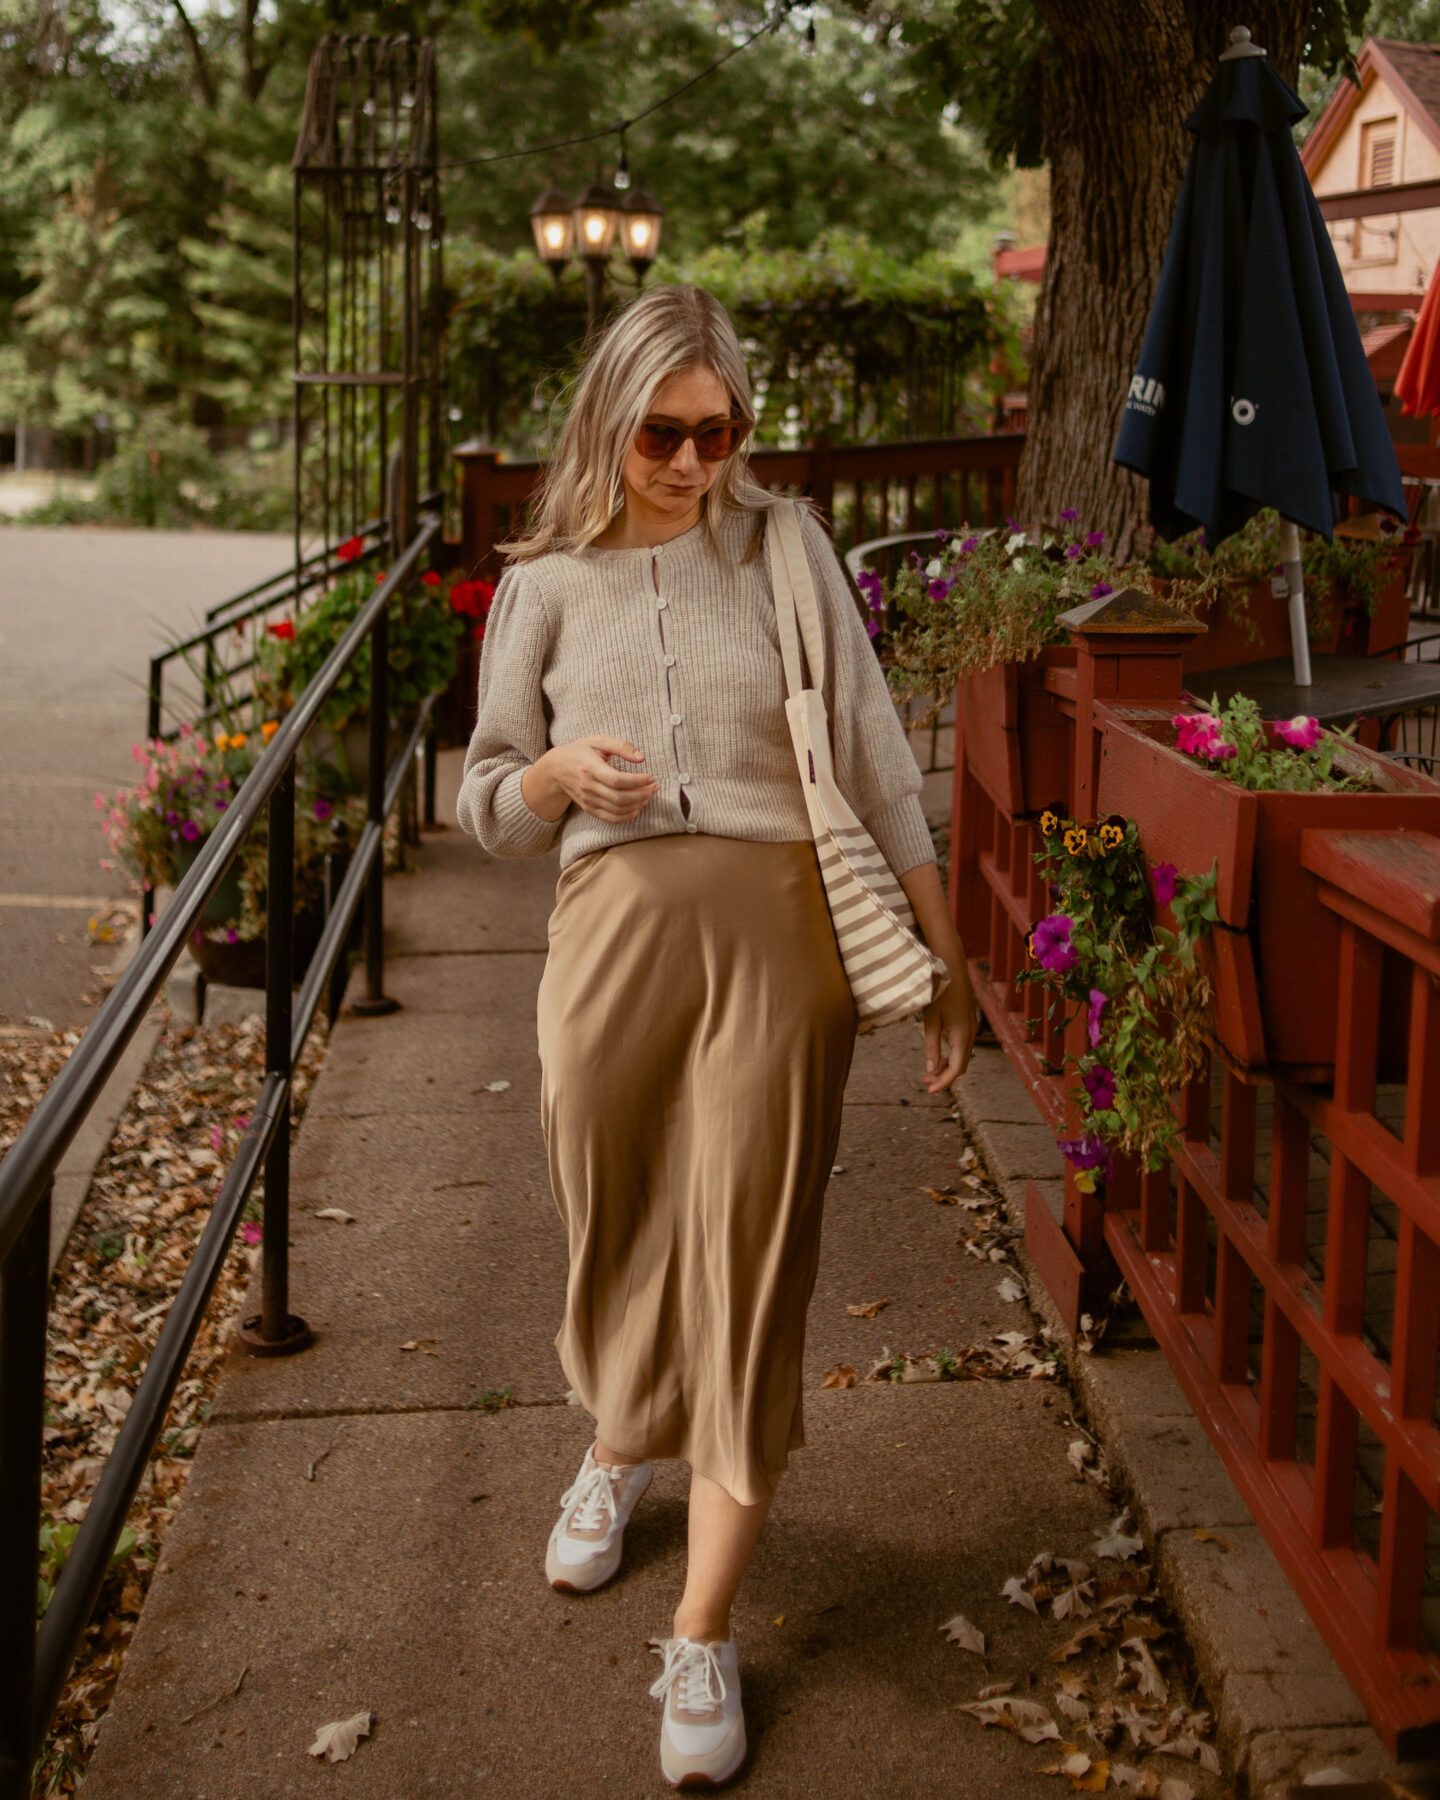 Karin Emily wears a puff sleeve cardigan with a camel colored slip skirt and a pair of tennis shoes